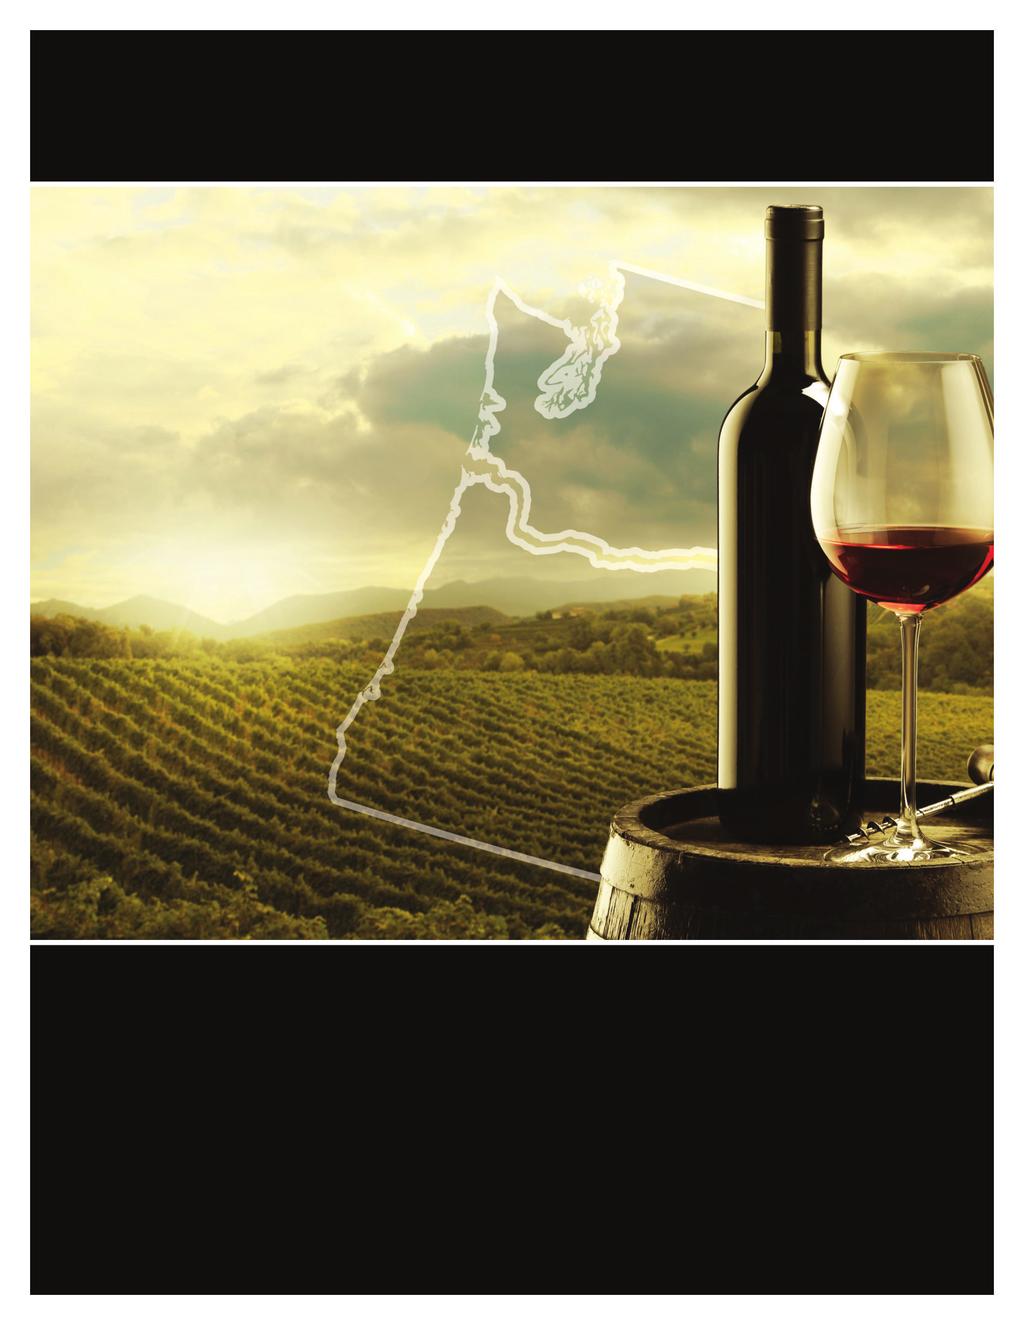 WASHINGTON WINE PRICE BOOK July-September 2018 Maletis Beverage is a local, family owned beverage distributor committed to providing the highest quality of service and products.